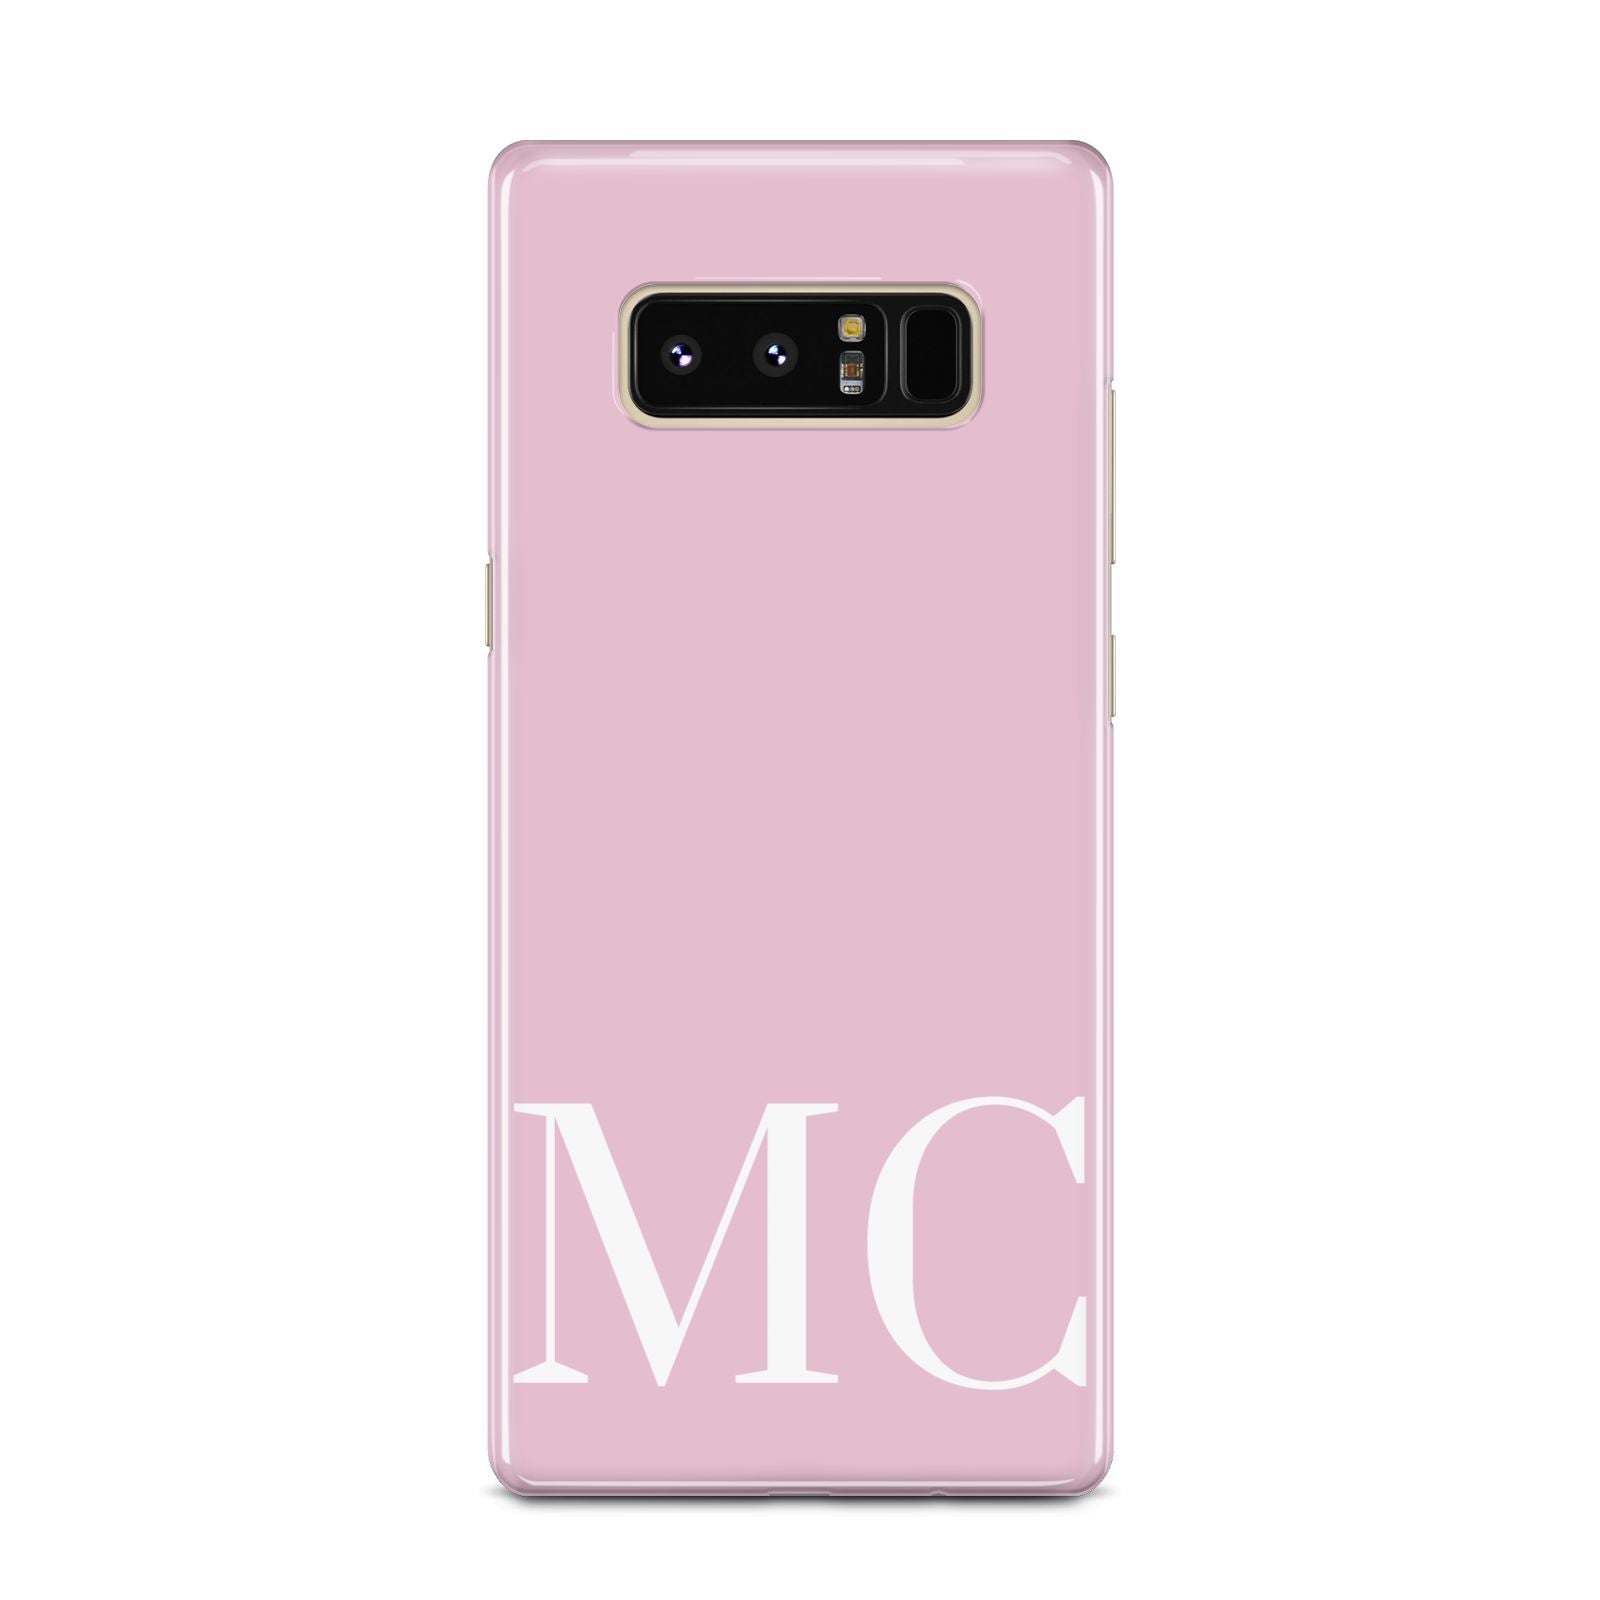 Initials Personalised 2 Samsung Galaxy Note 8 Case